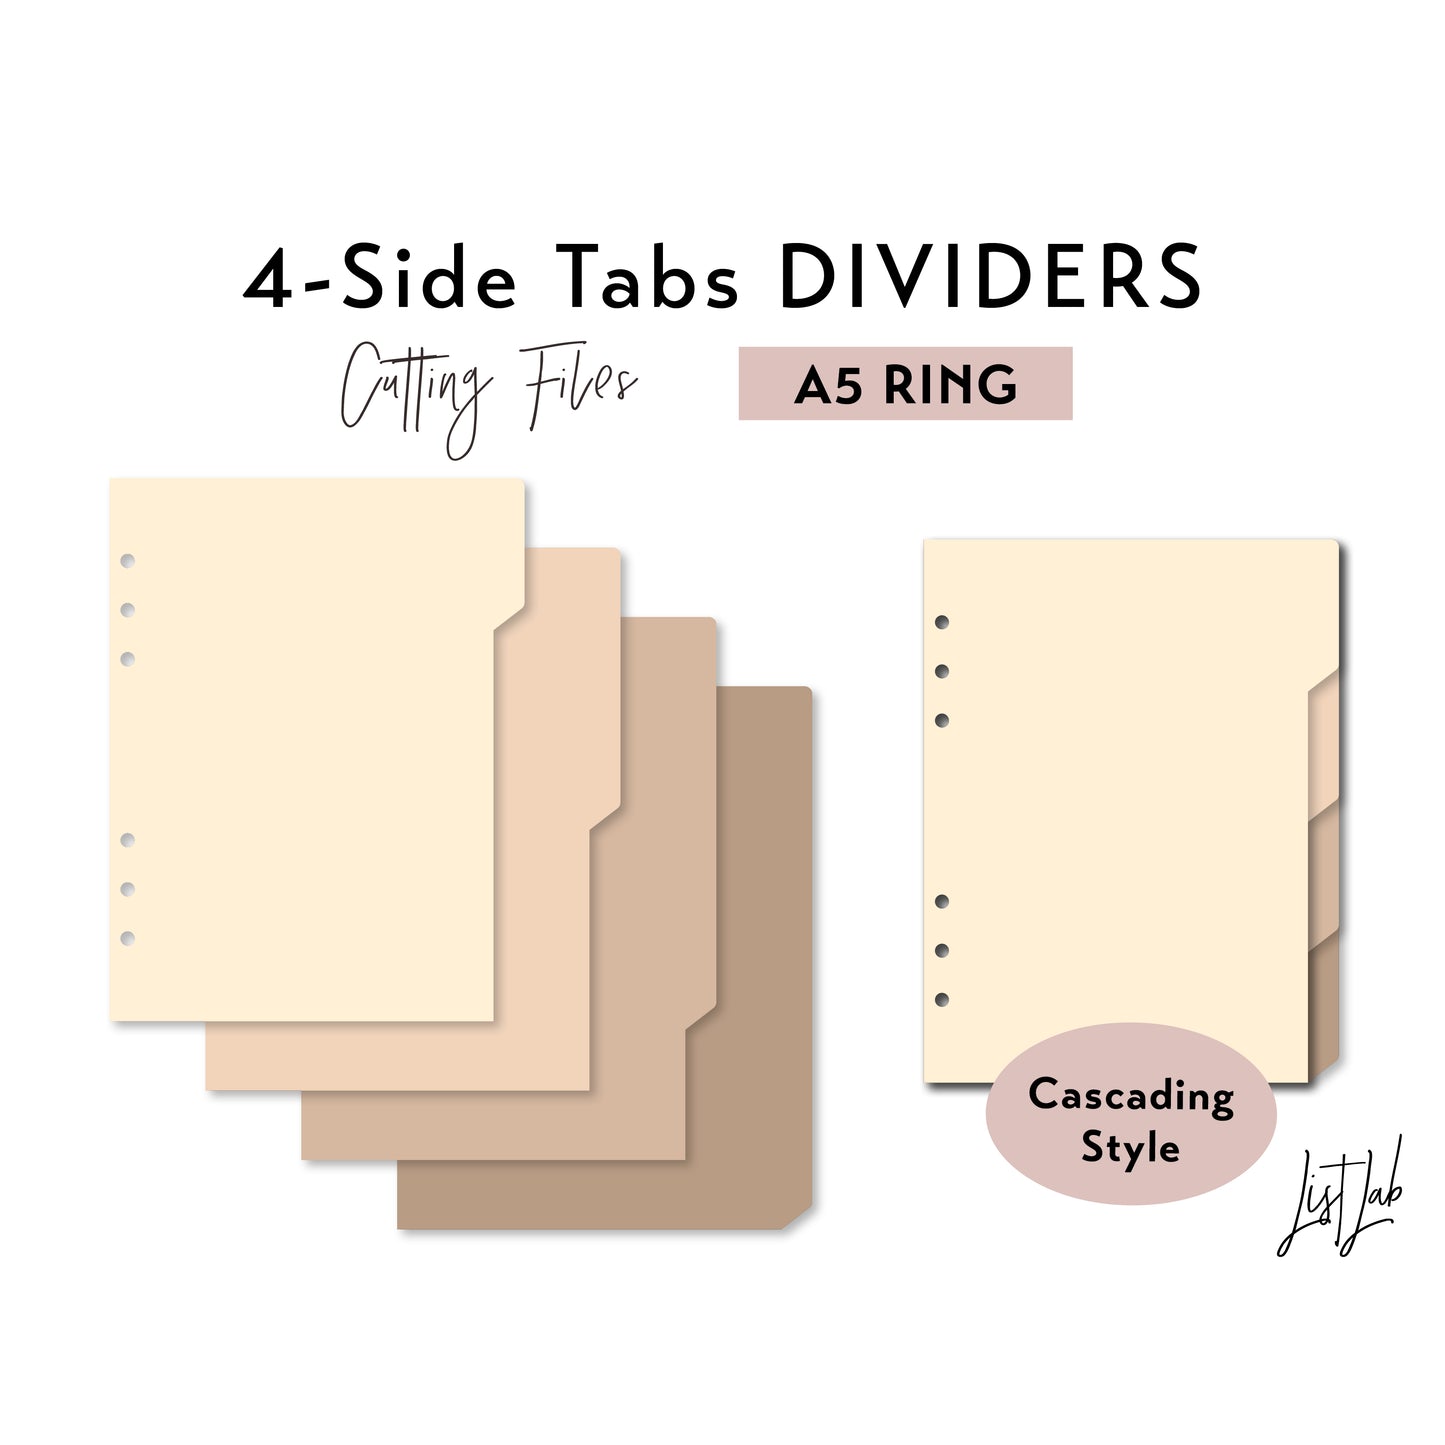 A5 Ring size 4-SIDE Cascading Tab Dividers Cutting Files Set